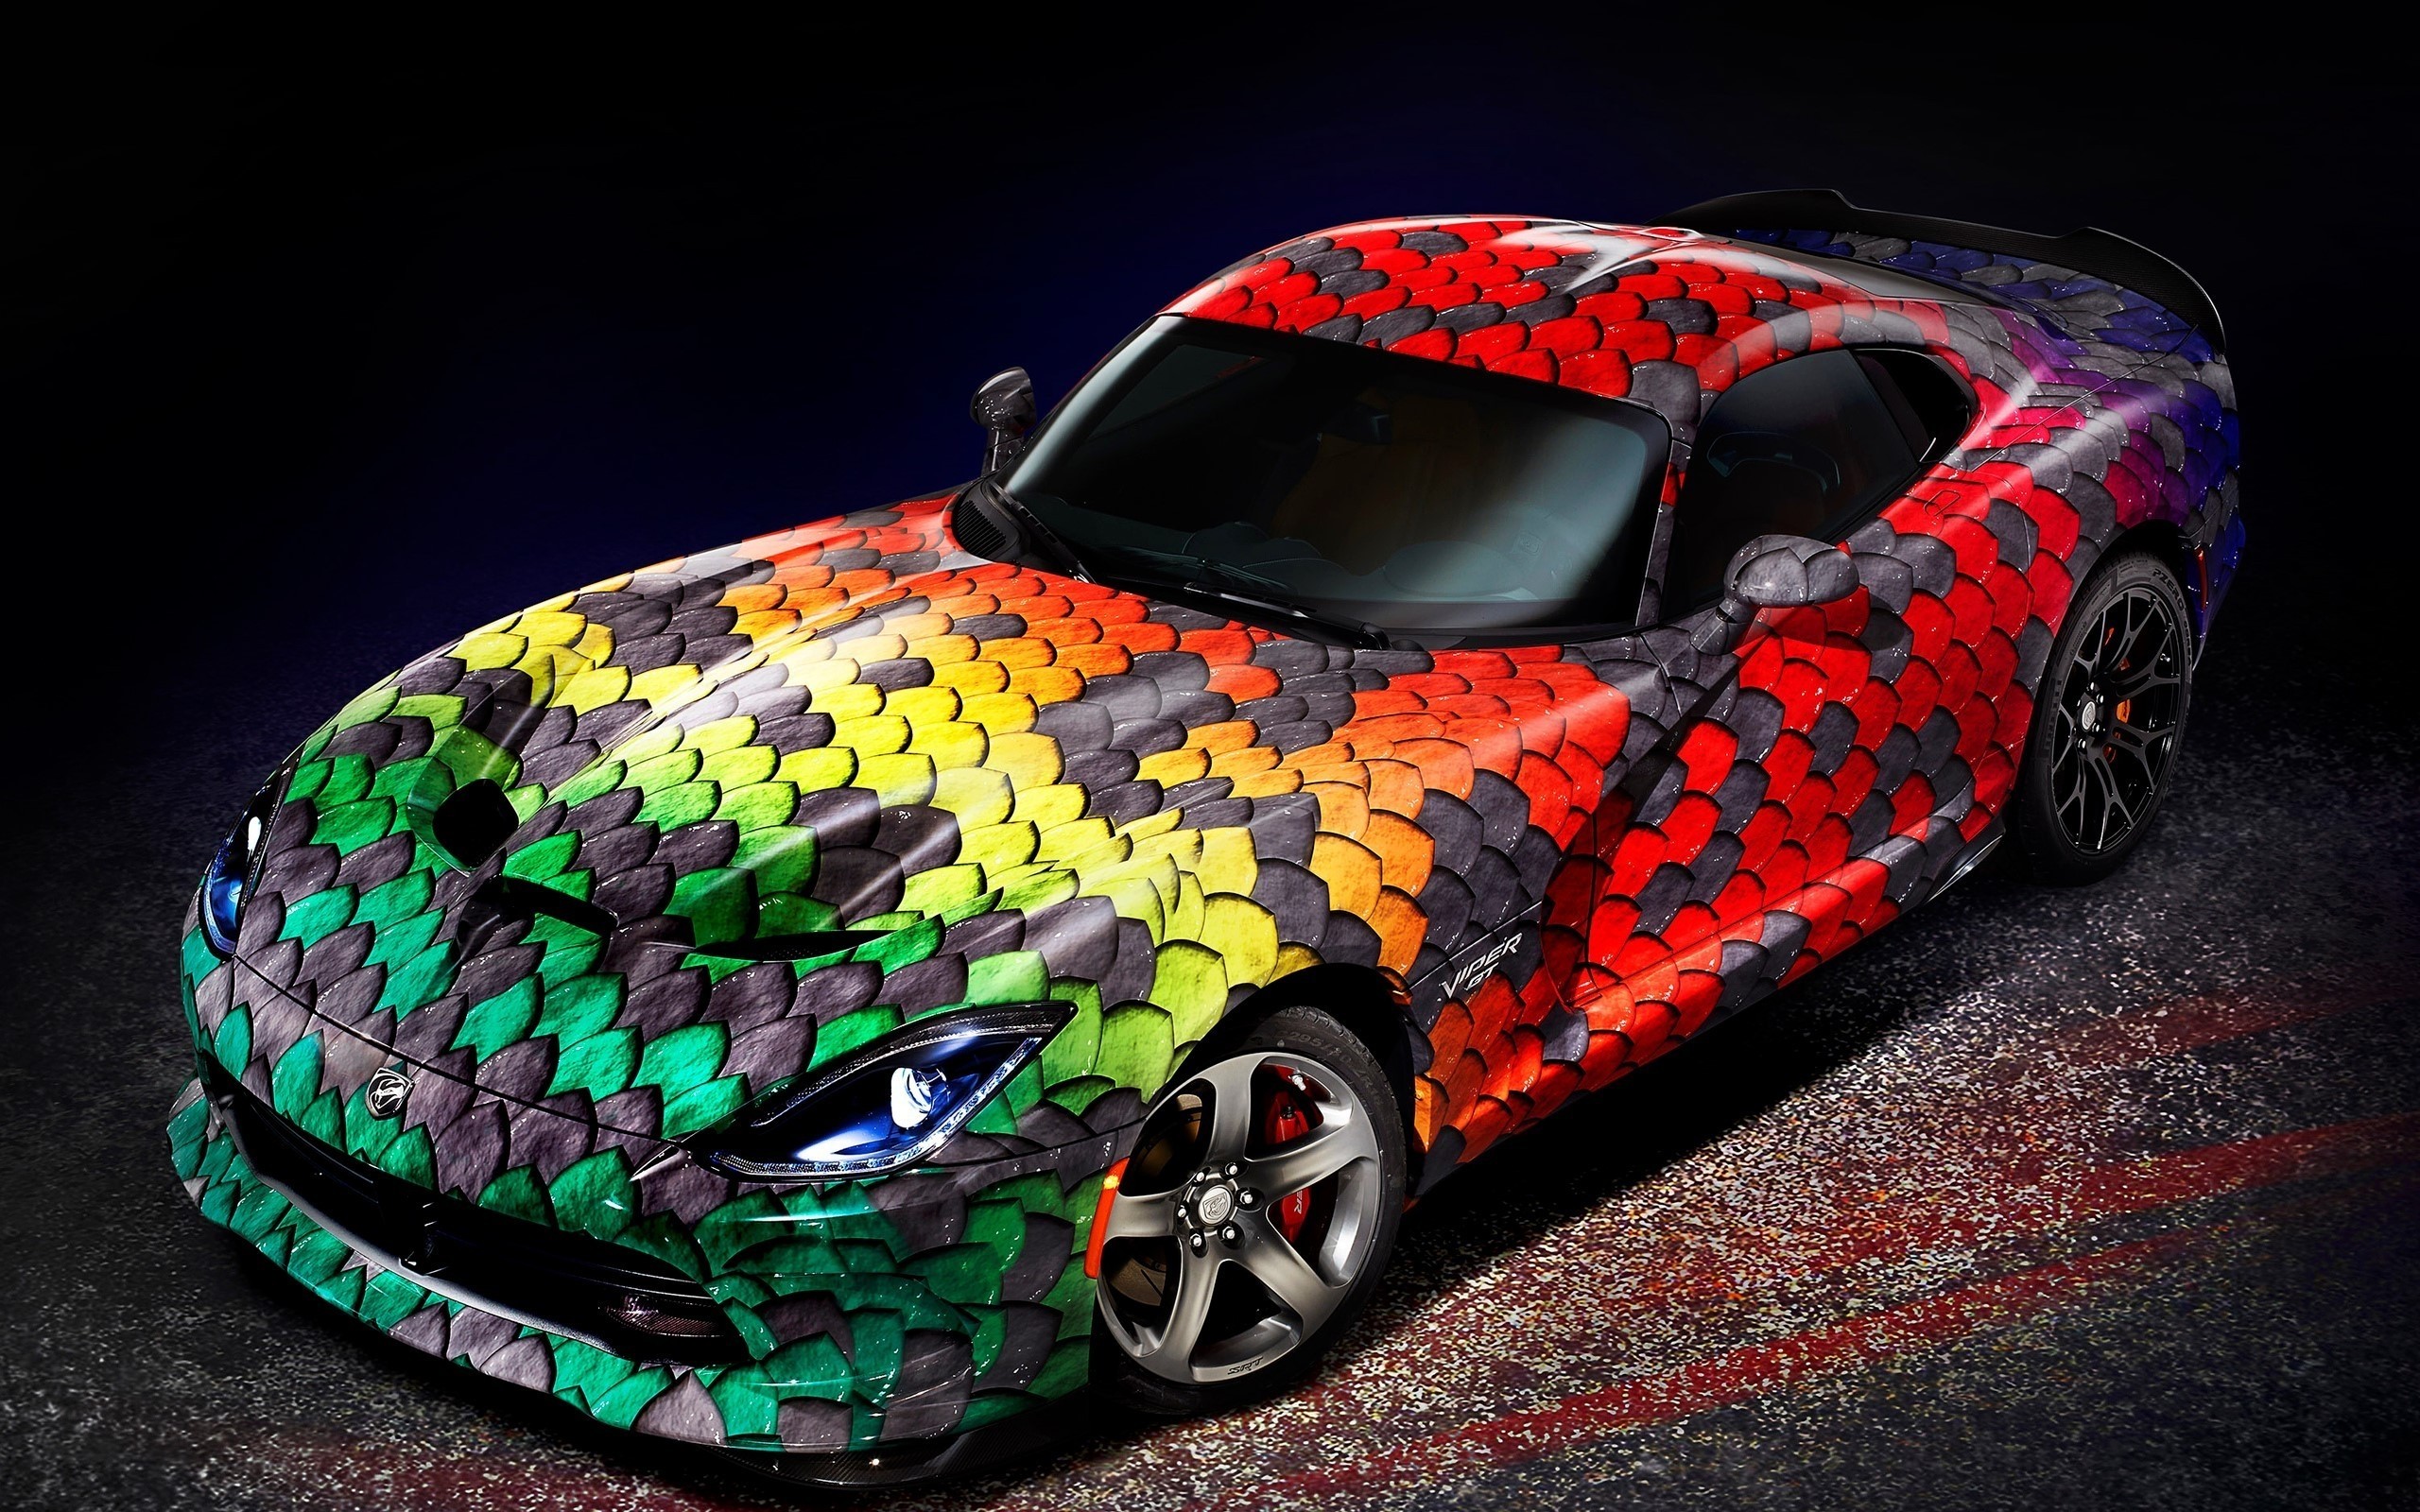 2560x1600 viper snake skin uhd wallpapers - Ultra High Definition Wallpapers .